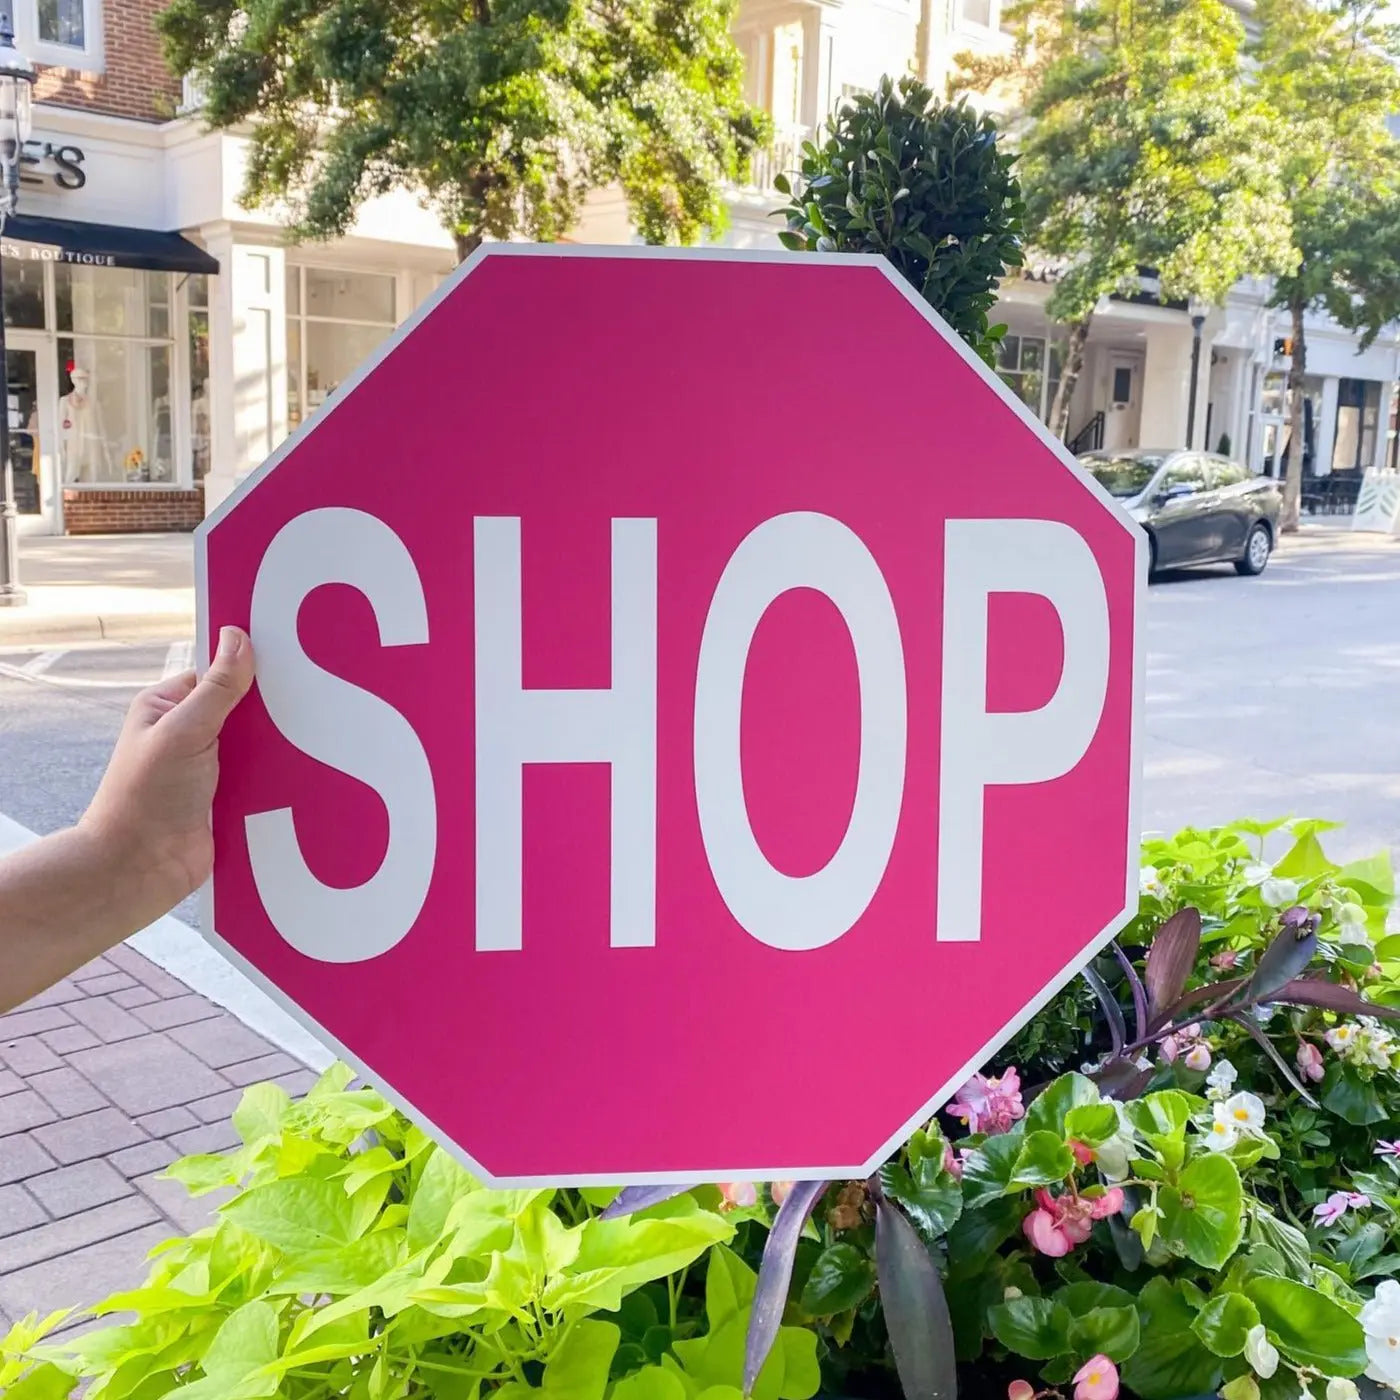 Pink shop stop sign being displayed near shops.